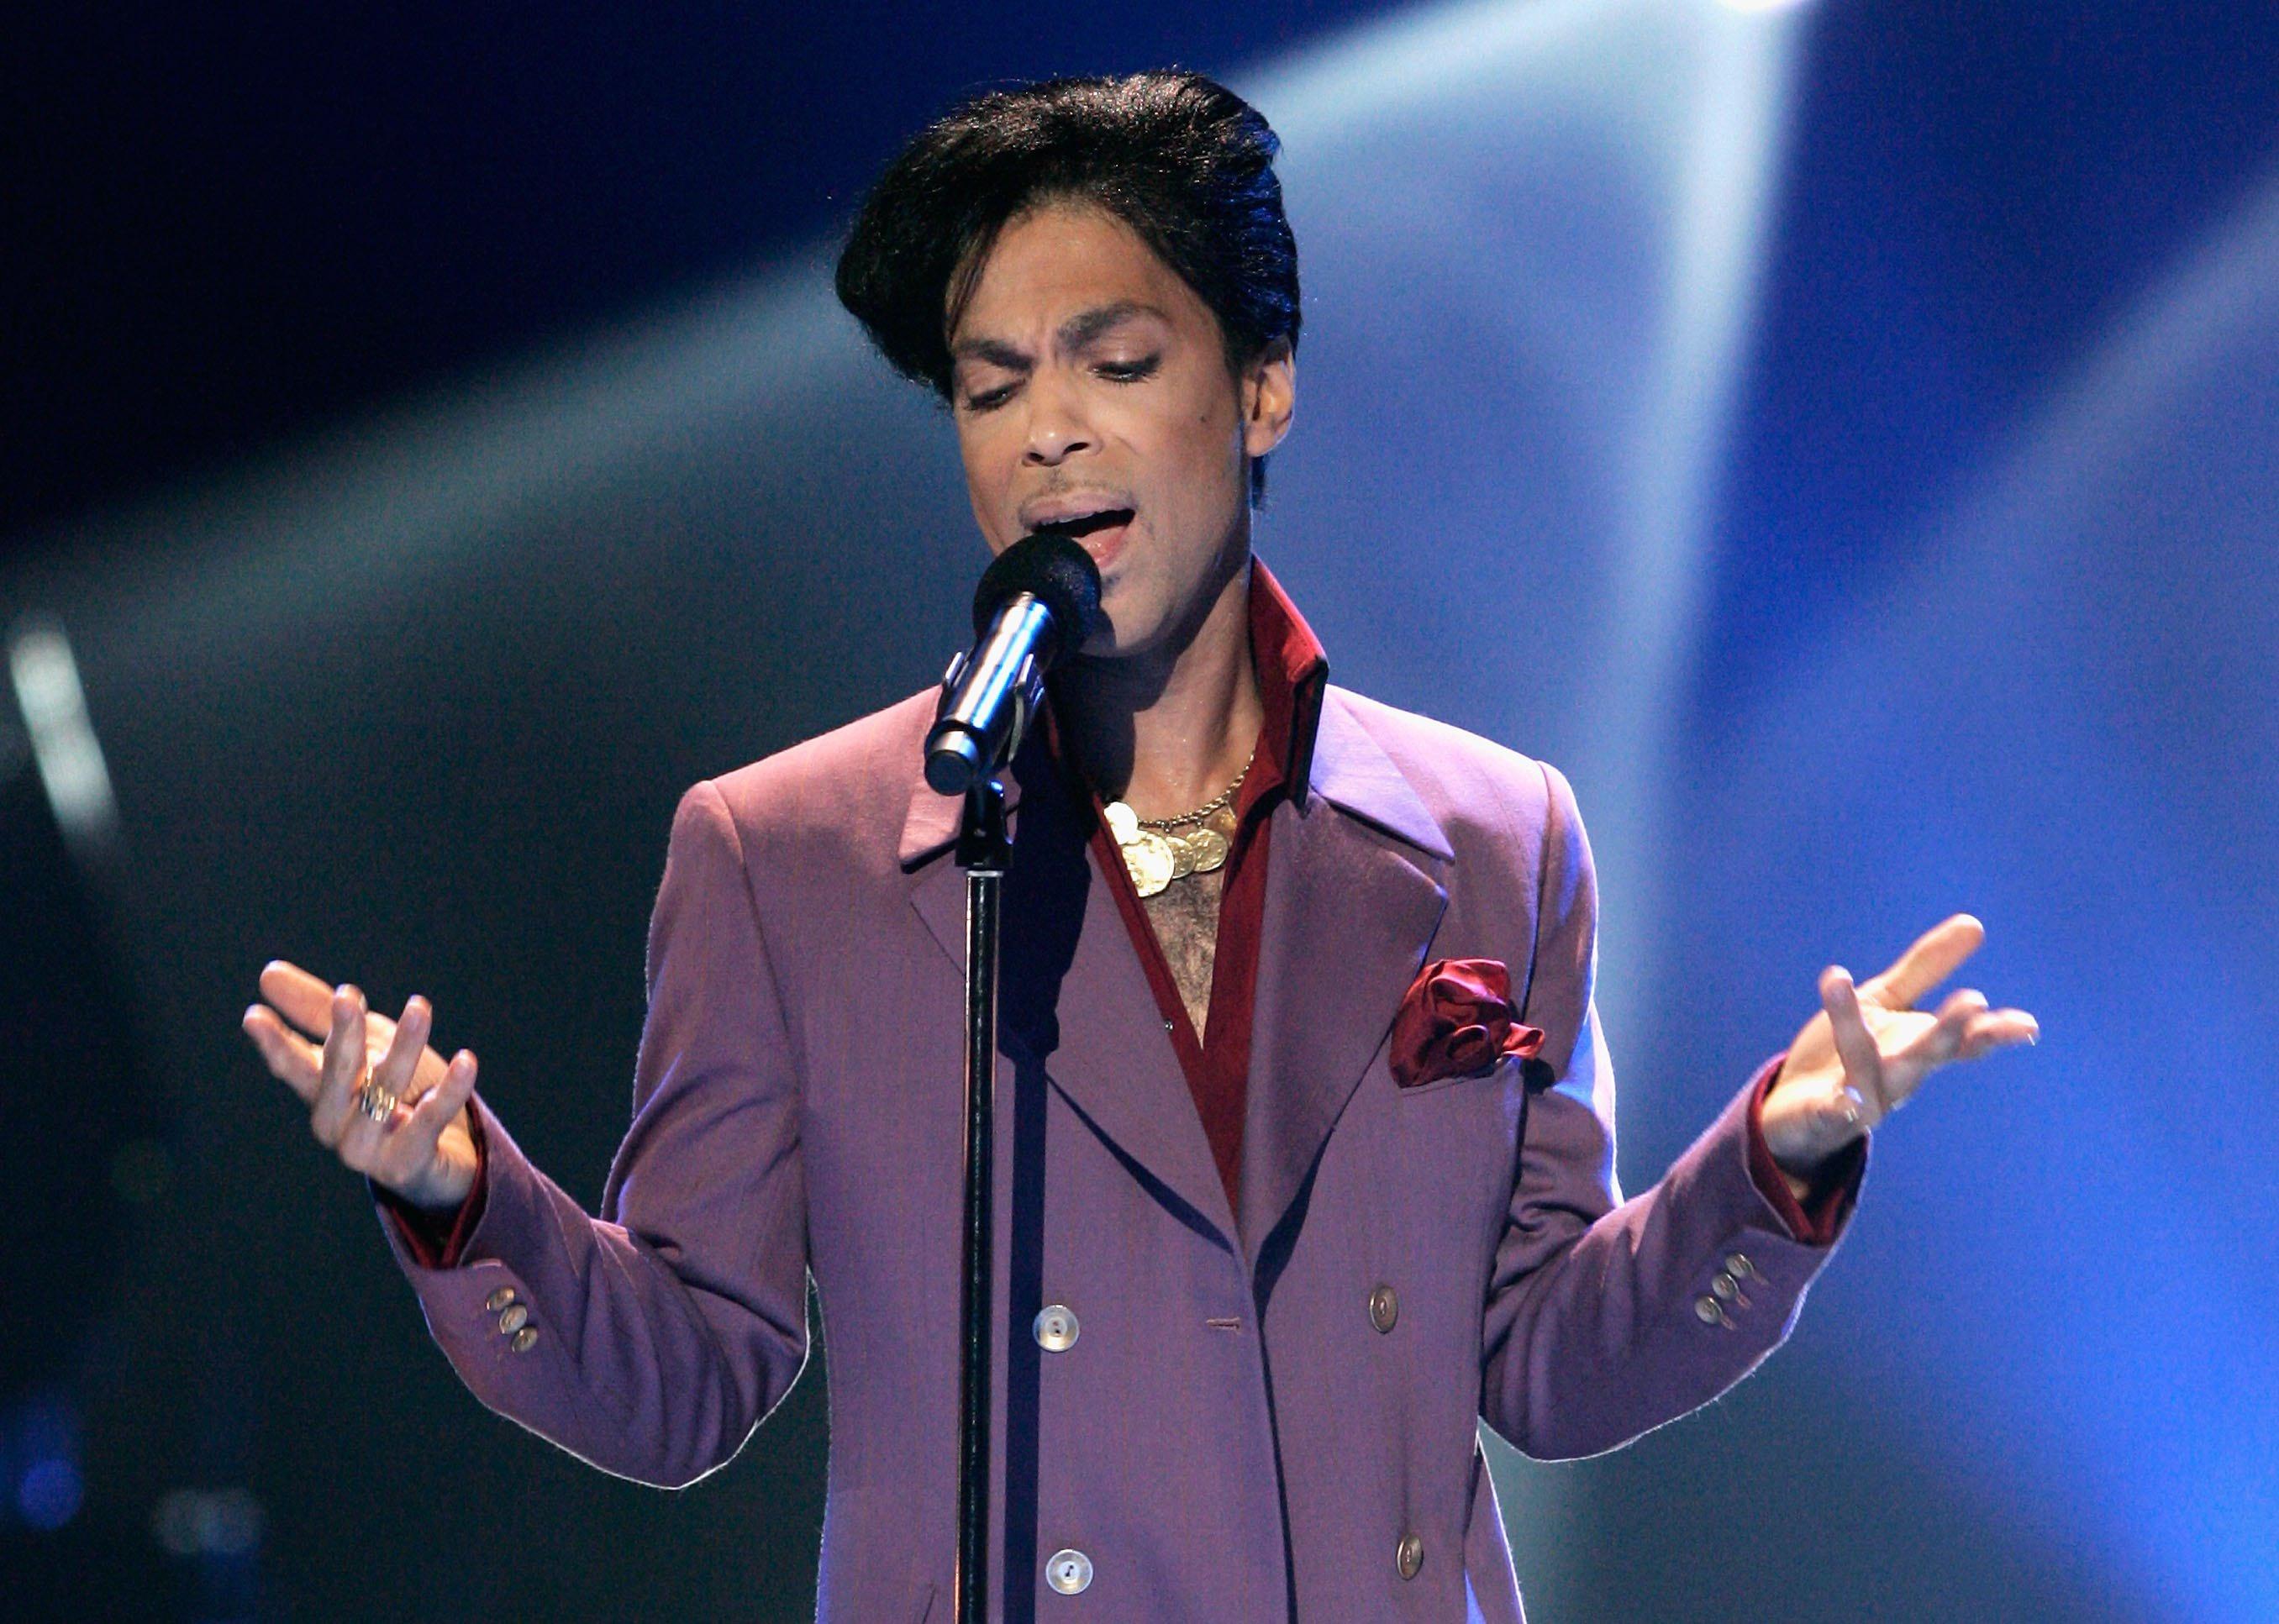 Prince performs onstage during the American Idol Season 5 Finale.